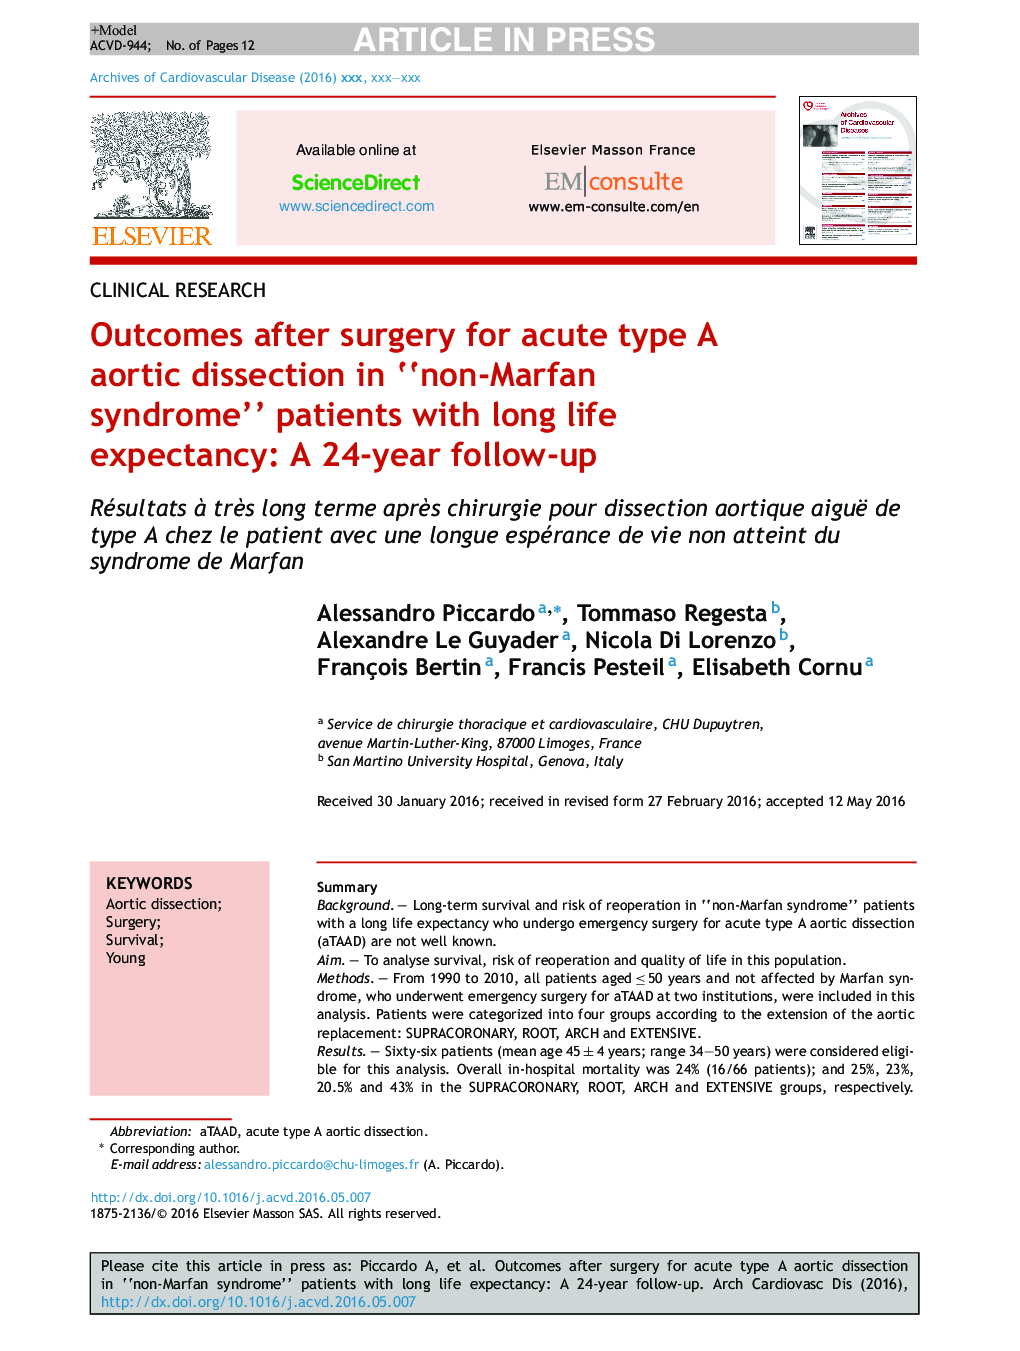 Outcomes after surgery for acute type A aortic dissection in “non-Marfan syndrome” patients with long life expectancy: A 24-year follow-up